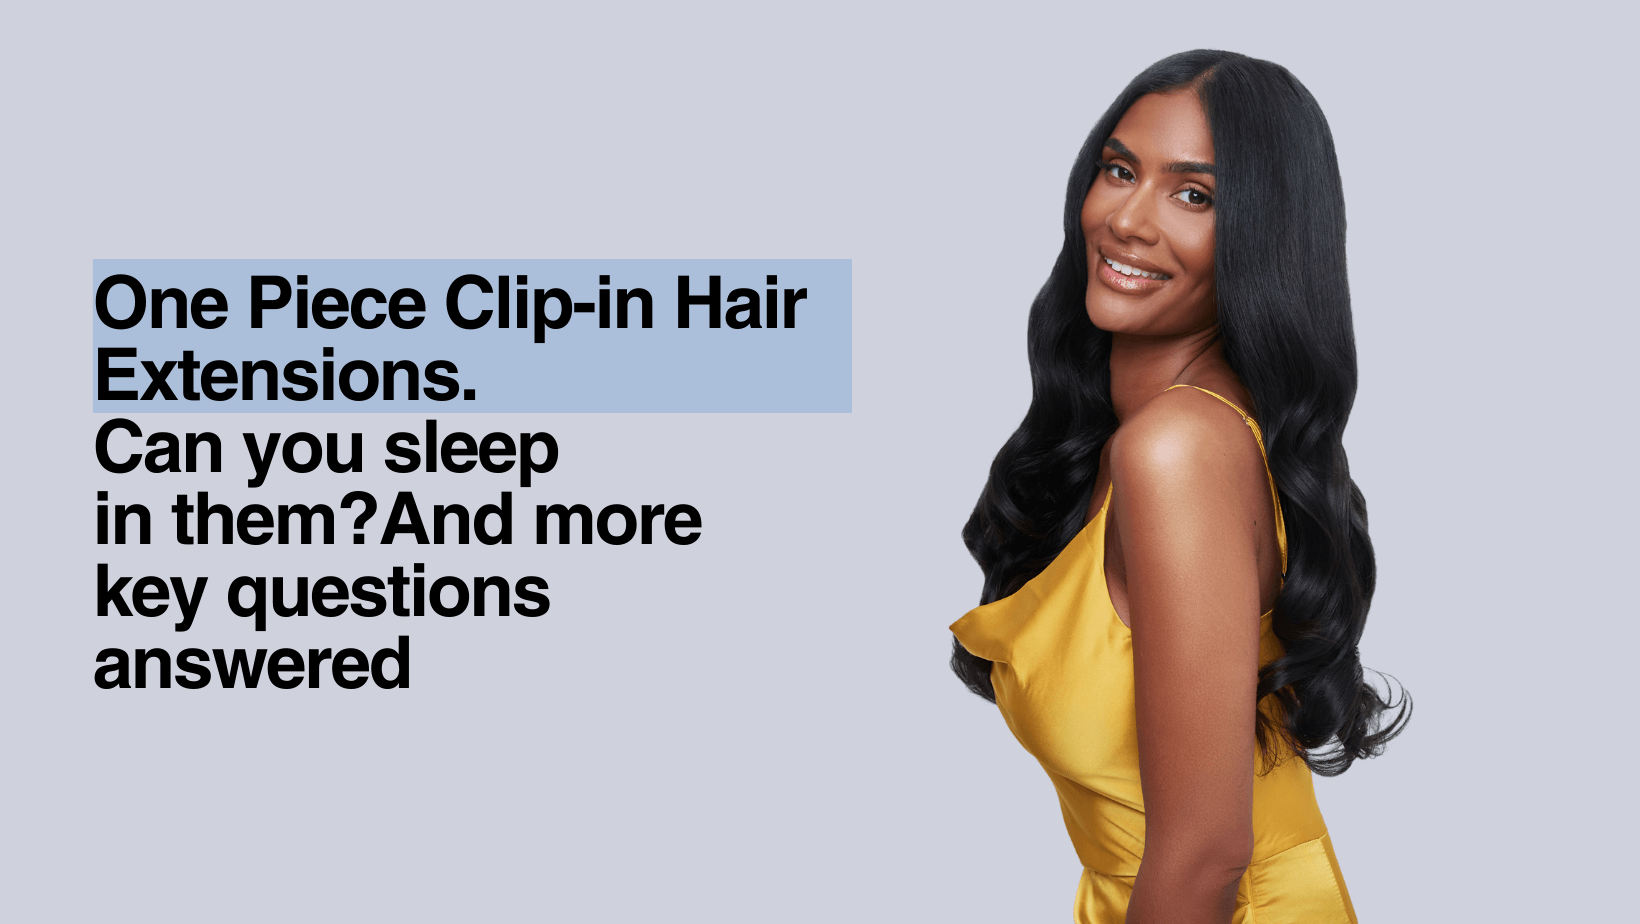 Can You Sleep in Clip-in Hair Extensions?